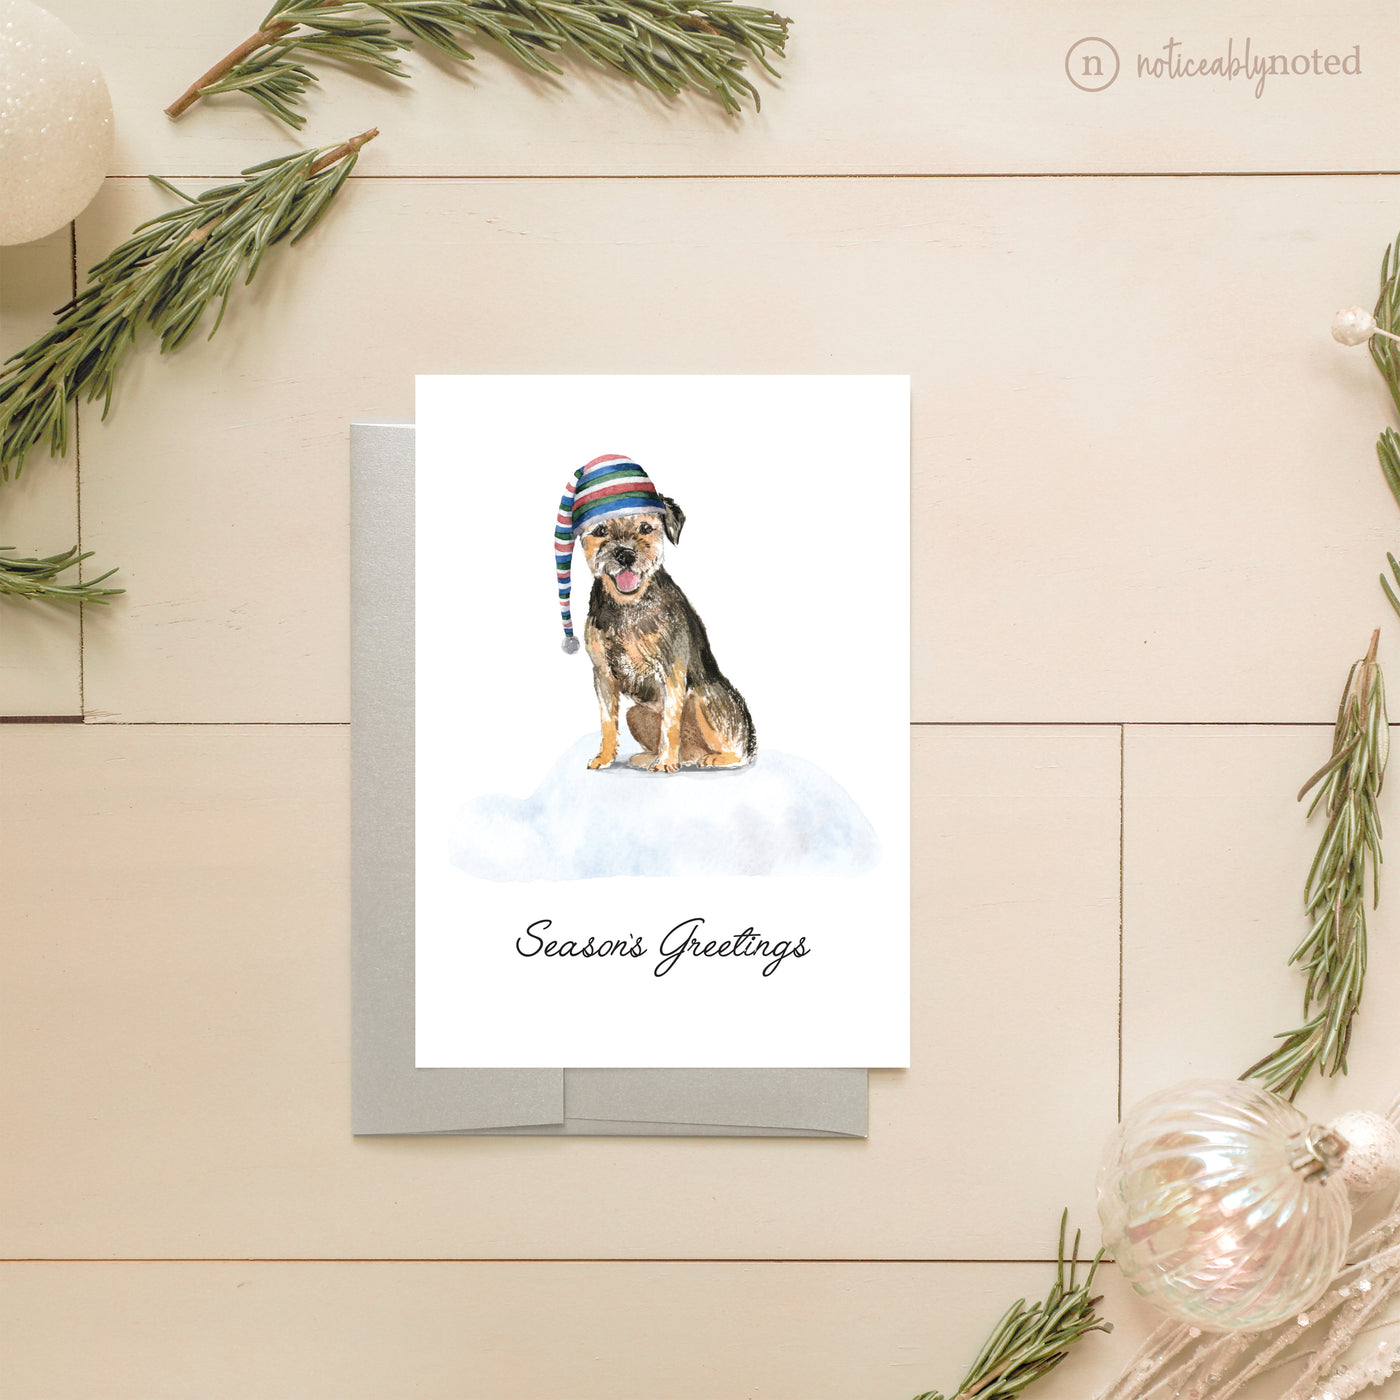 Border Terrier Dog Holiday Card | Noticeably Noted